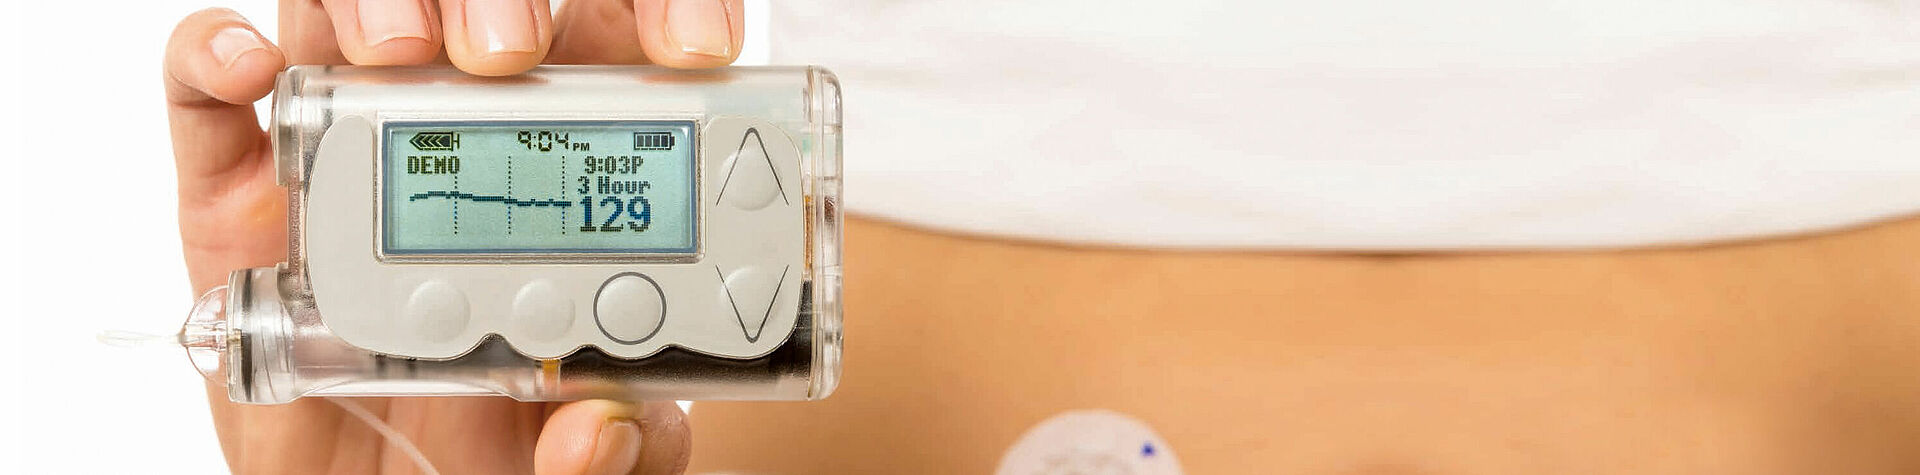 Brushless motor for insulin pump simplifies life with diabetes